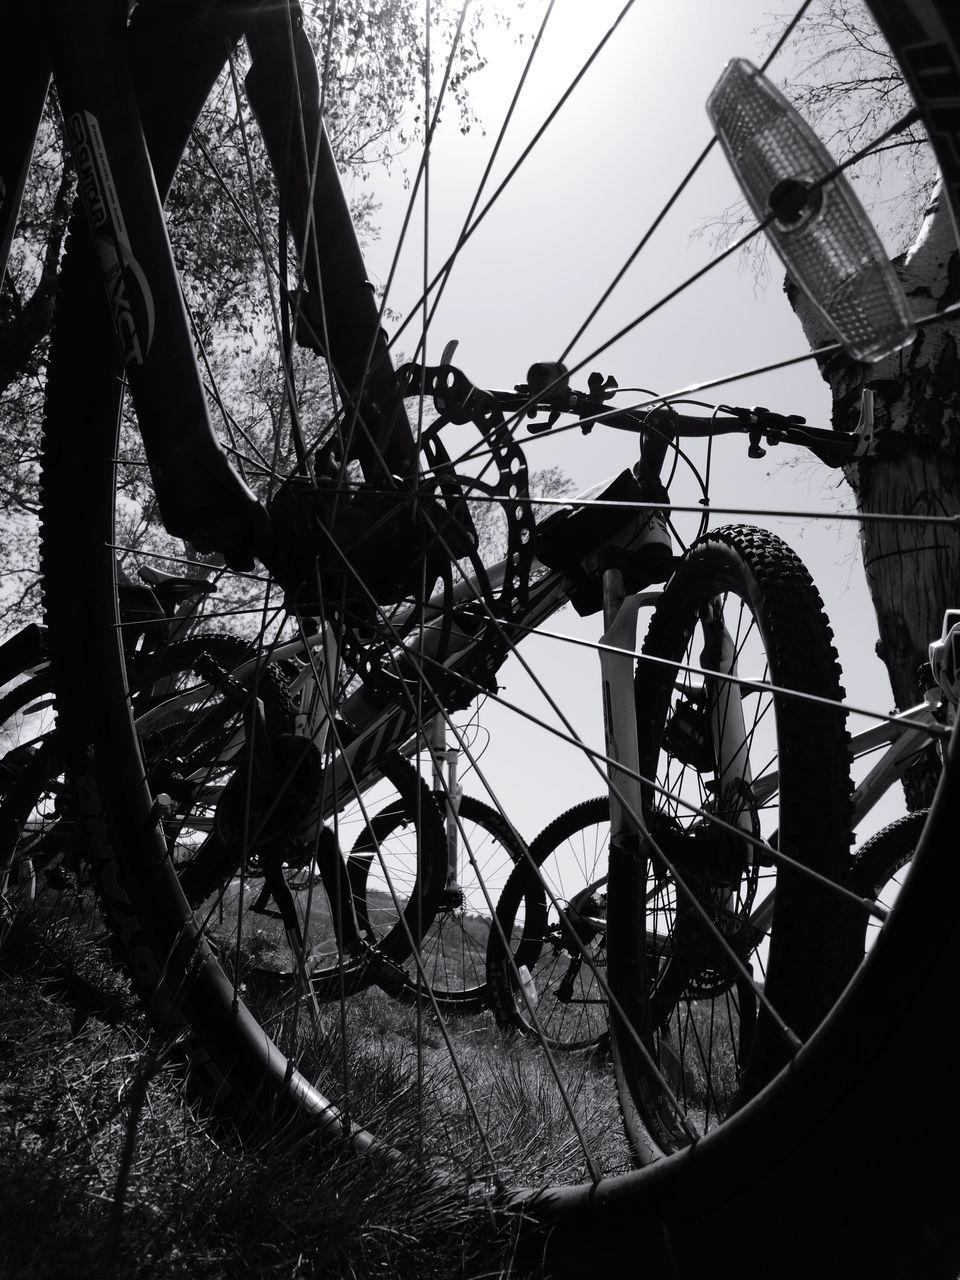 transportation, bicycle, wheel, mode of transport, day, outdoors, land vehicle, spoke, no people, tire, close-up, sky